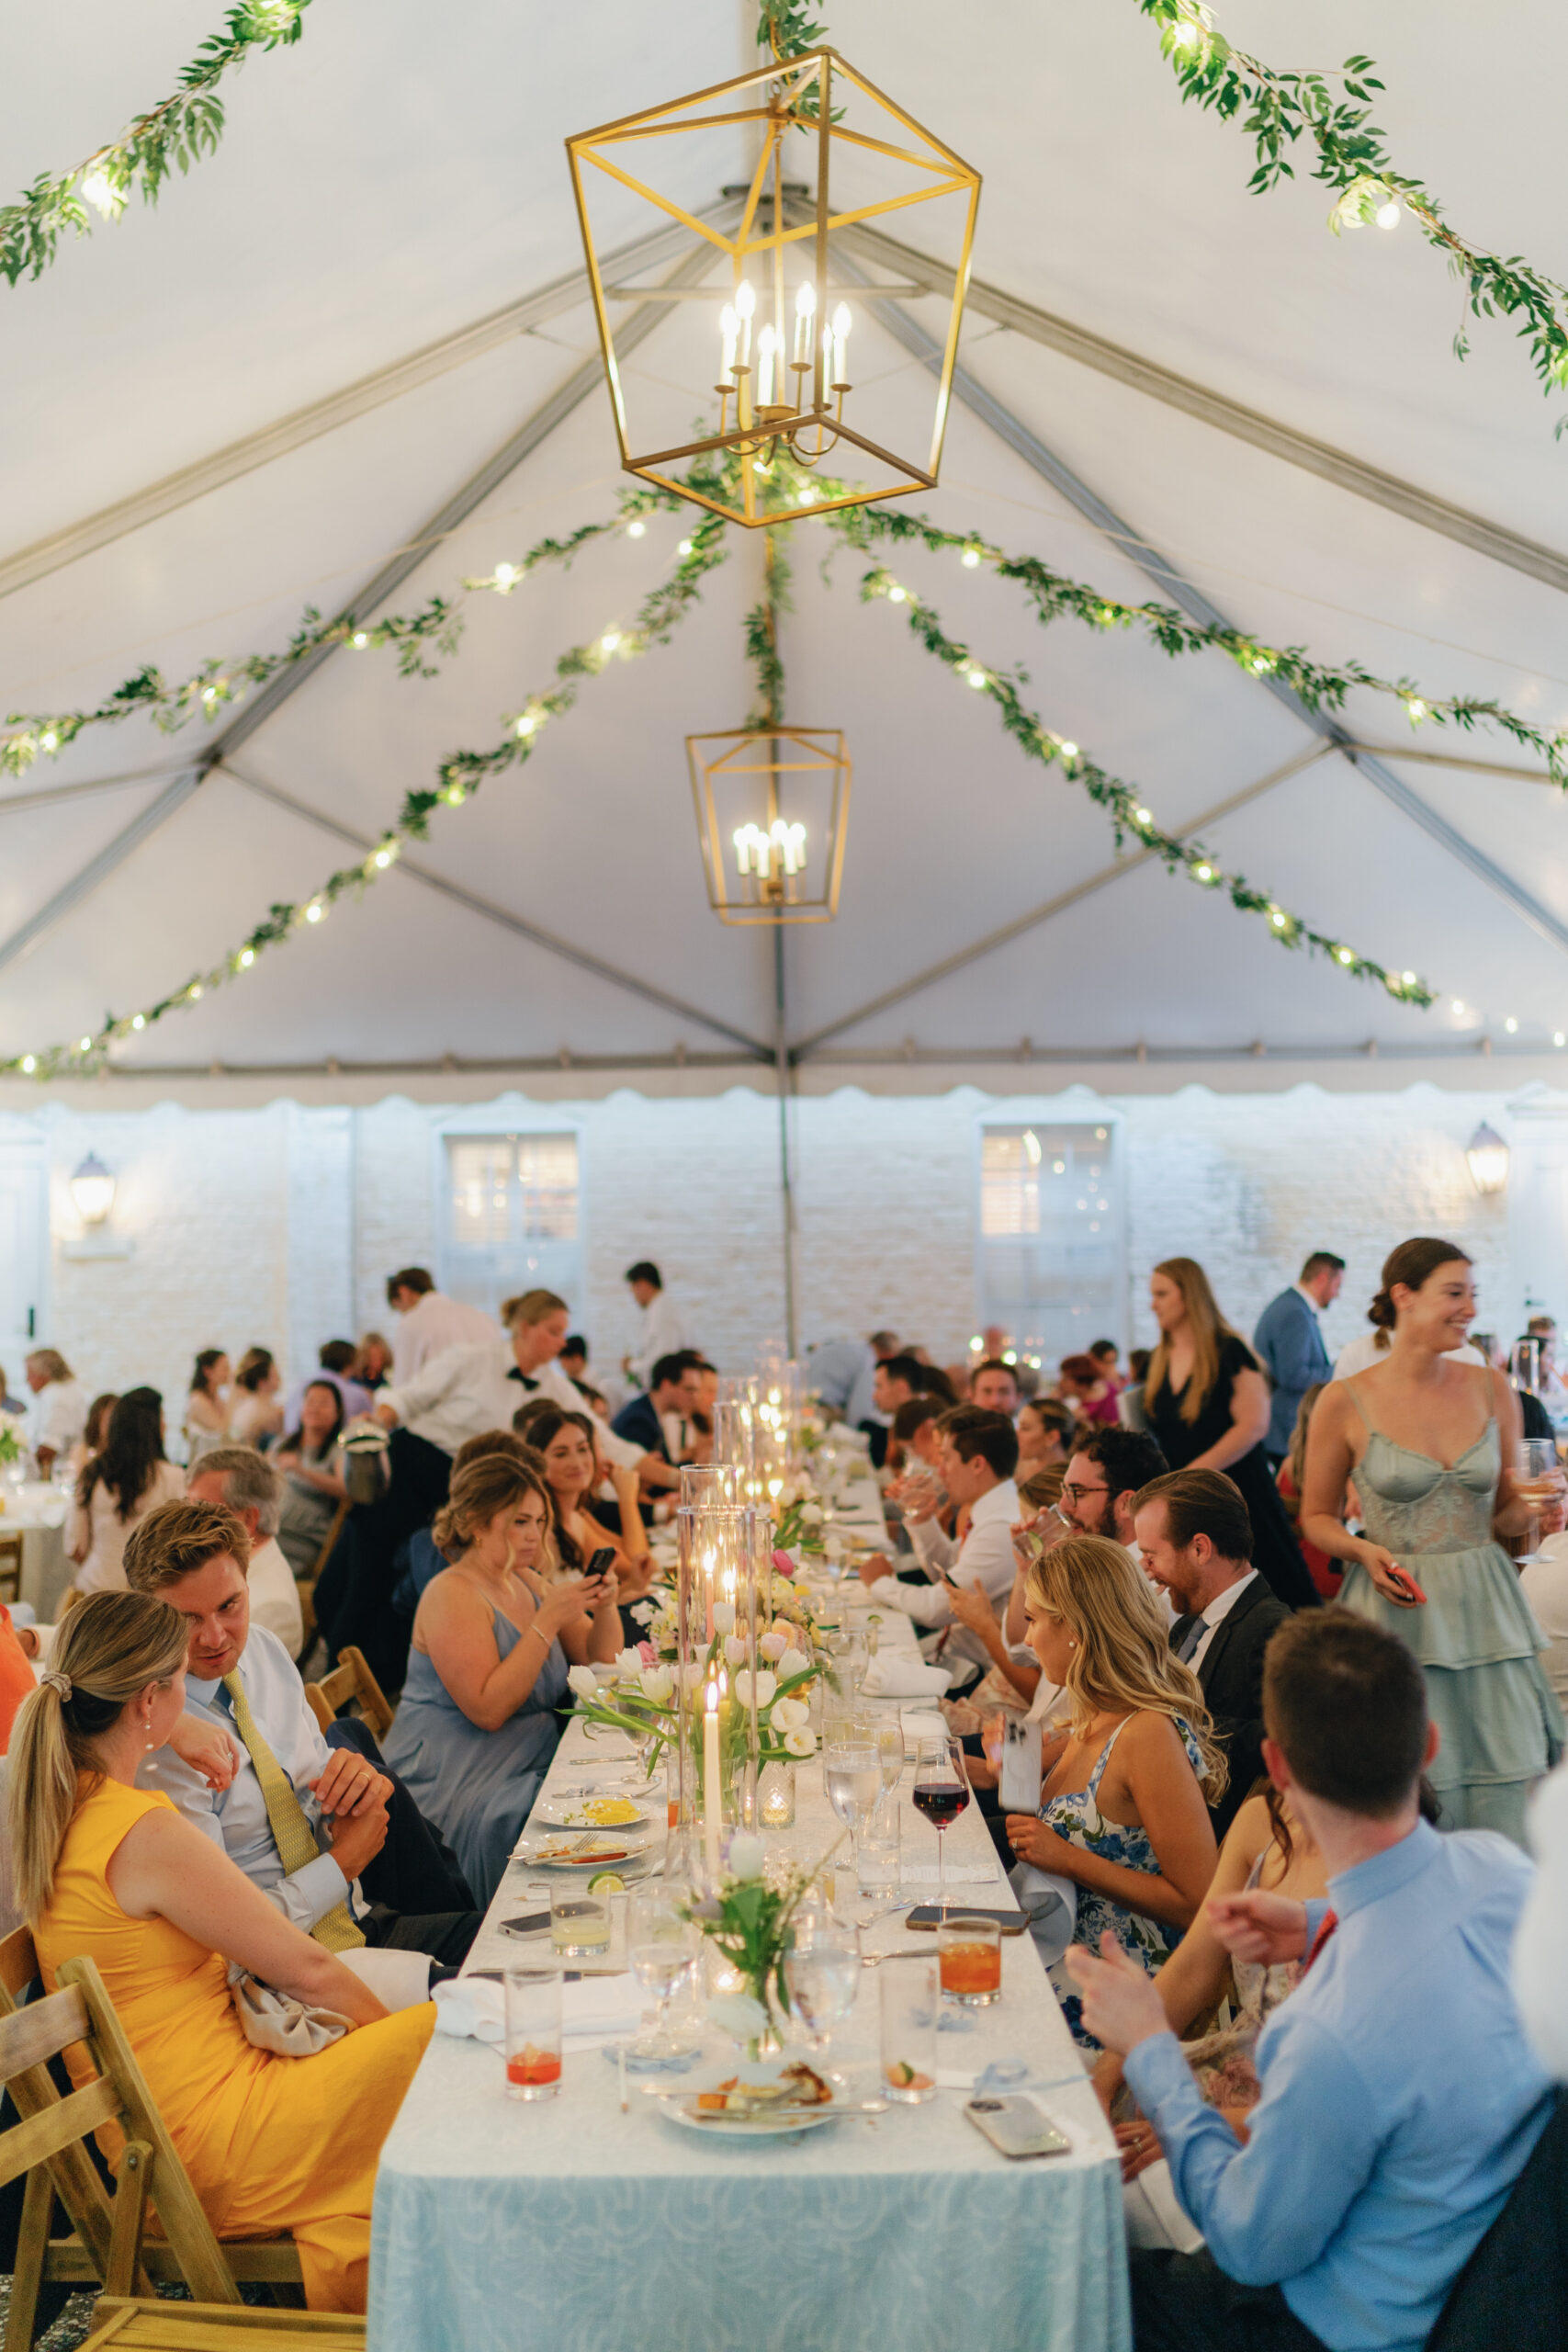 Dinner time at Charleston spring wedding reception. Hanging greenery and string lights with gold box modern chandeliers. 